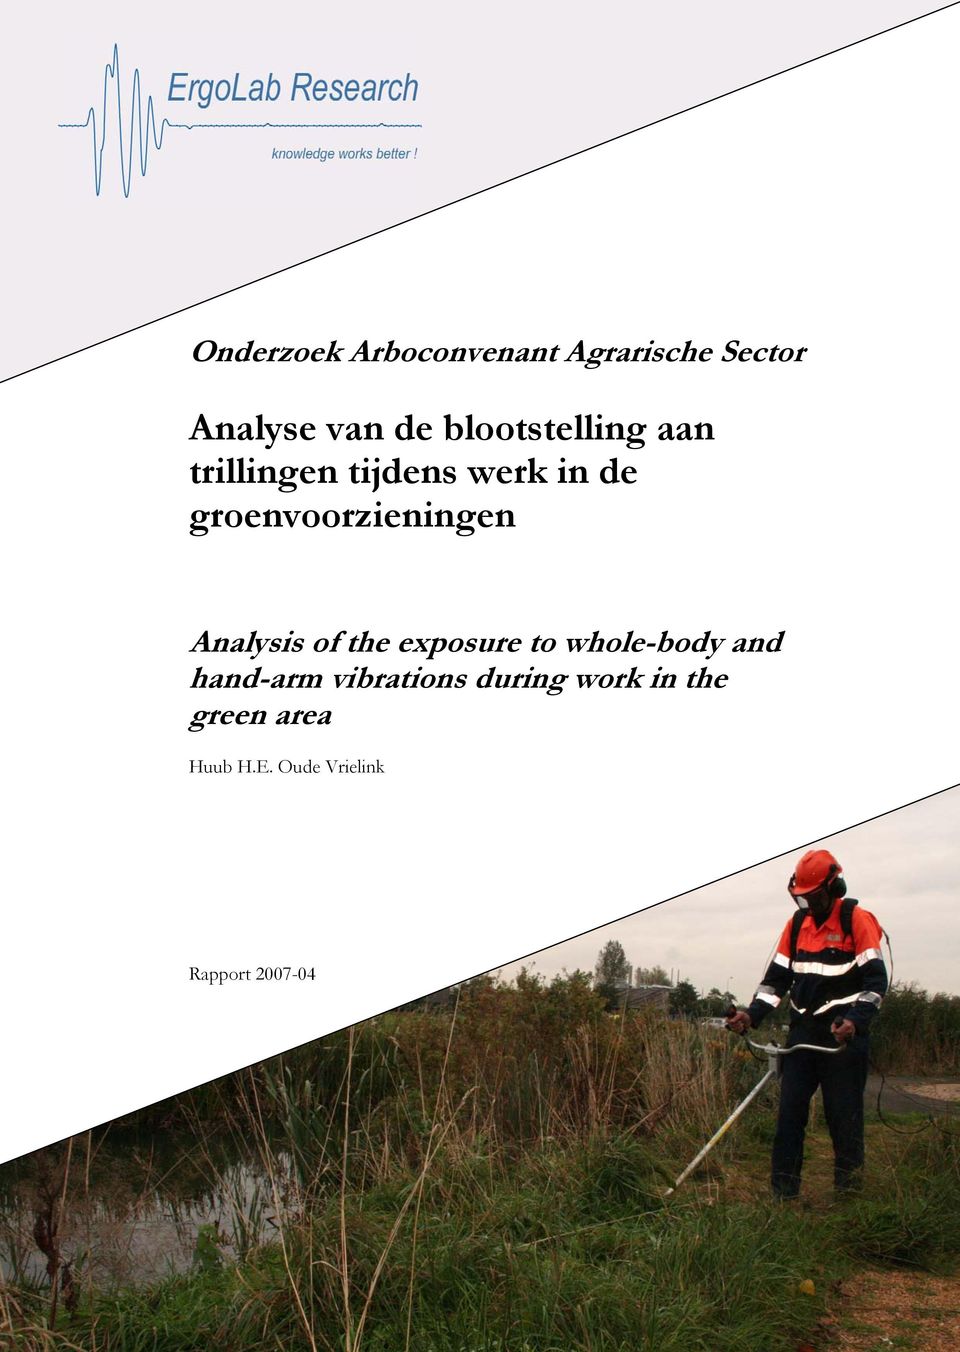 groenvoorzieningen Analysis of the exposure to whole-body and